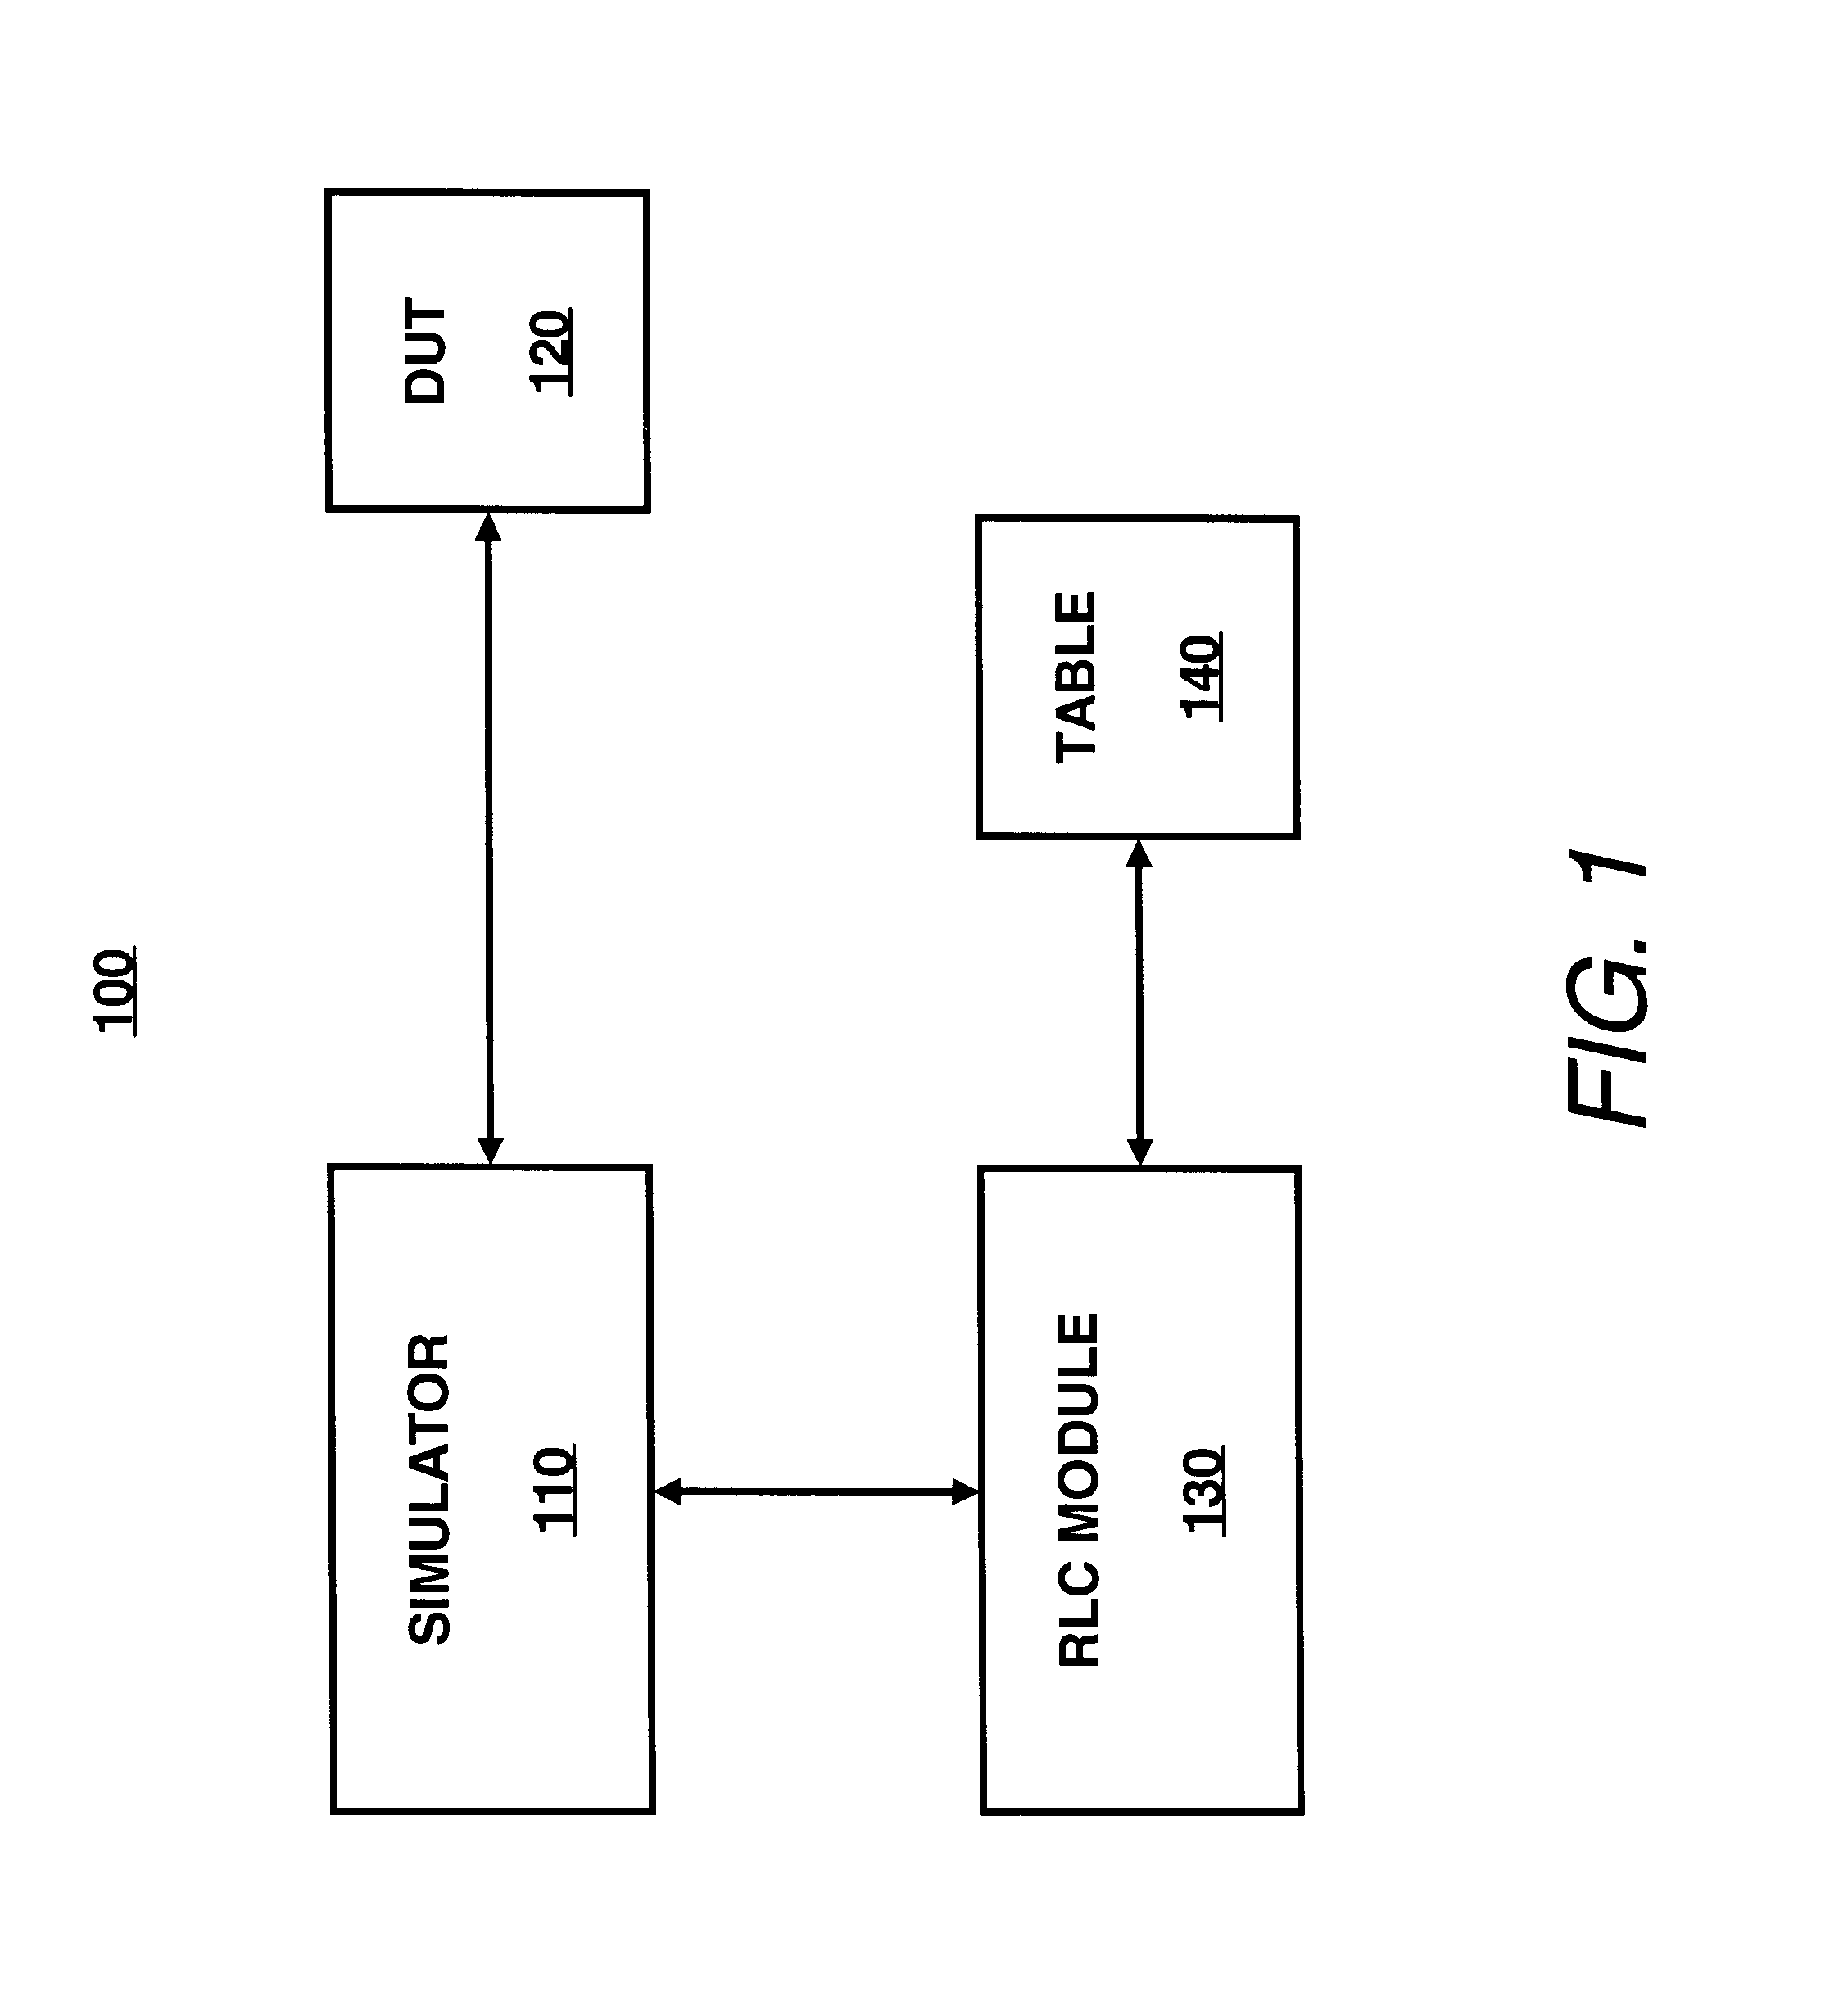 System for improving circuit simulations by utilizing a simplified circuit model based on effective capacitance and inductance values